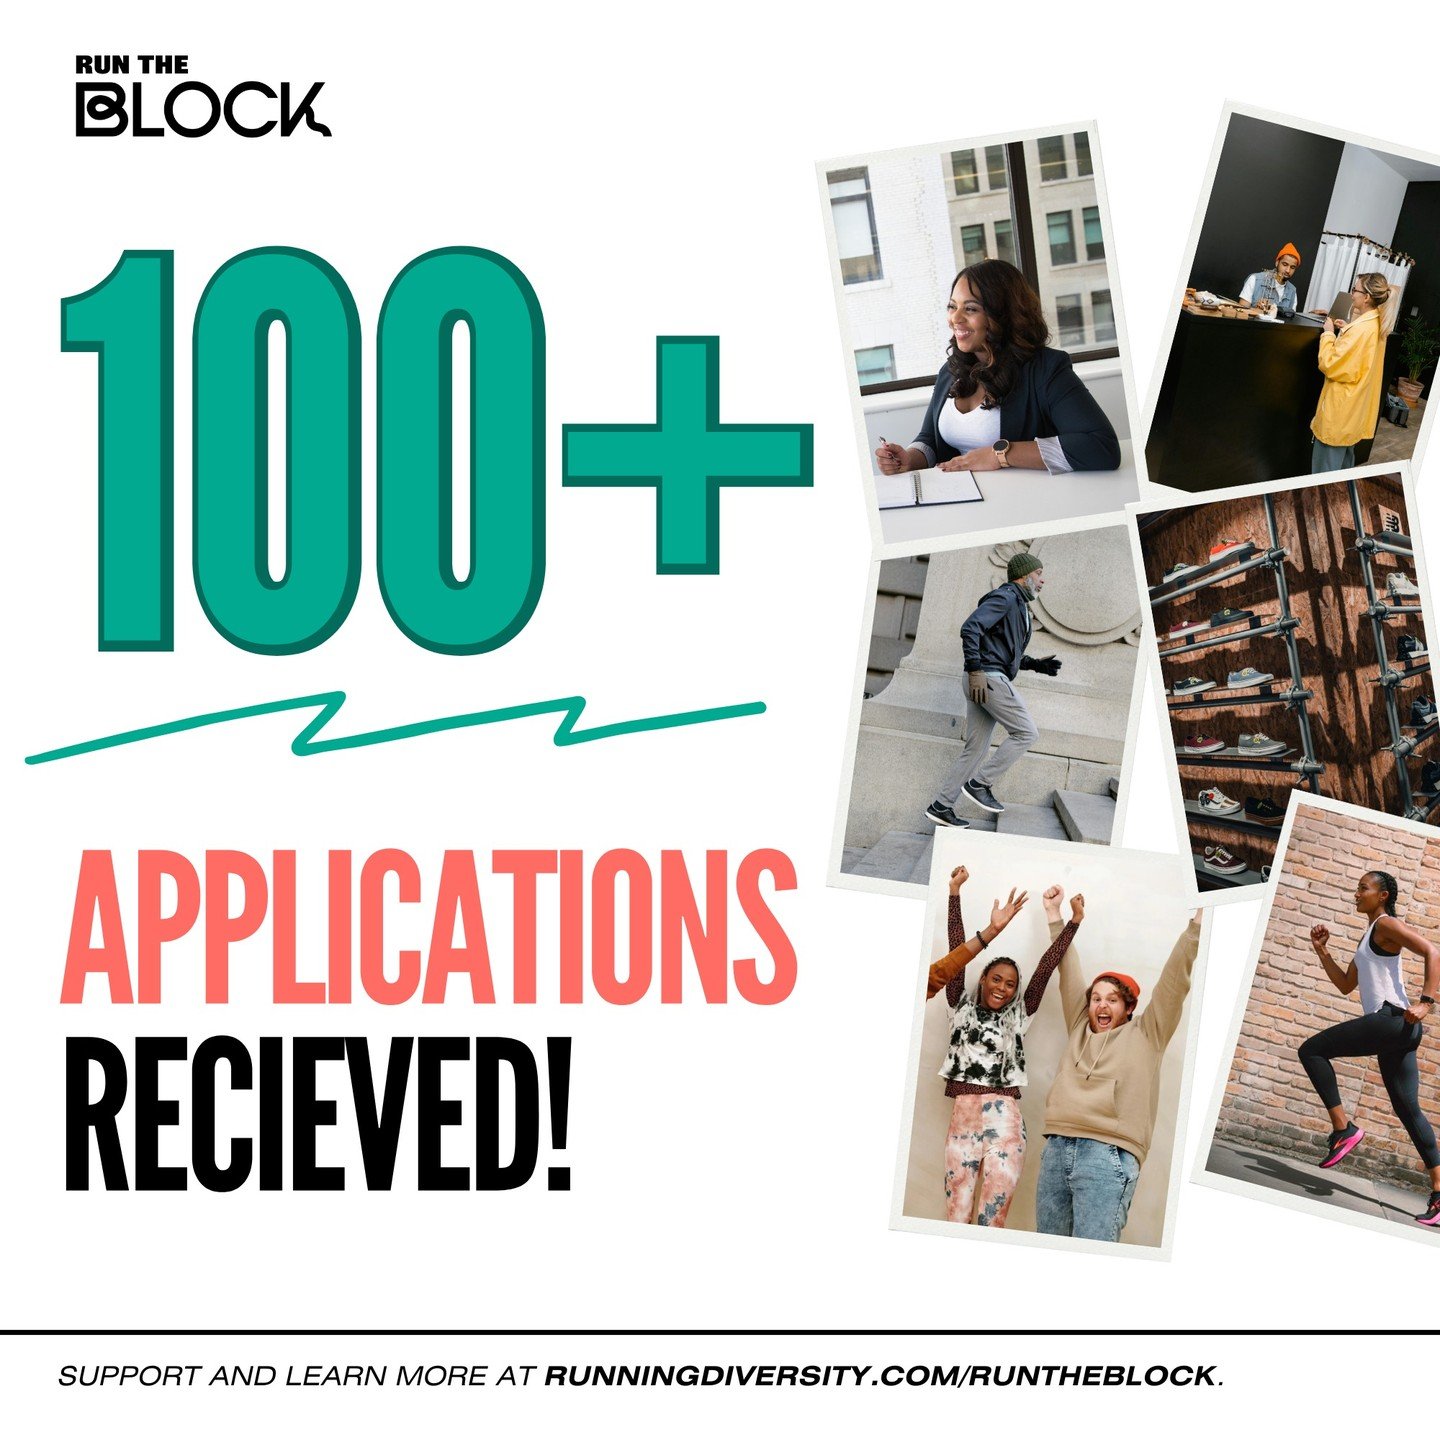 🎉 We are thrilled to announce that we have received over 100 submissions for our inaugural RUN THE BLOCK program! This is an amazing response for a first-of-its-kind initiative to increase Black ownership in the running industry.

Applications came 